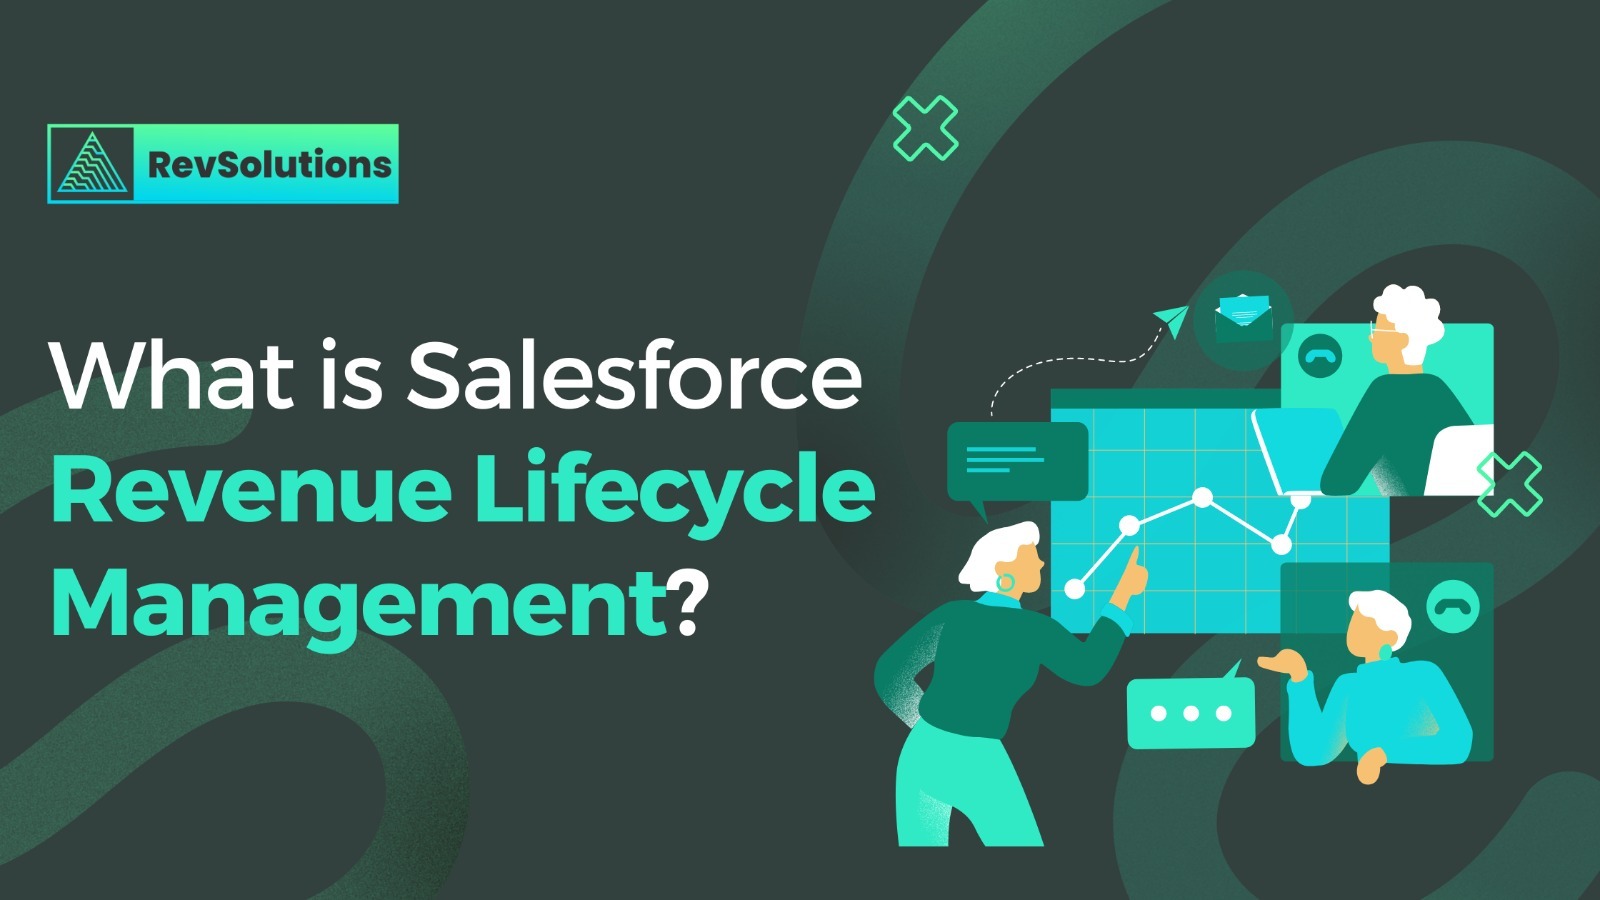 What is Salesforce Revenue Lifecycle Management?